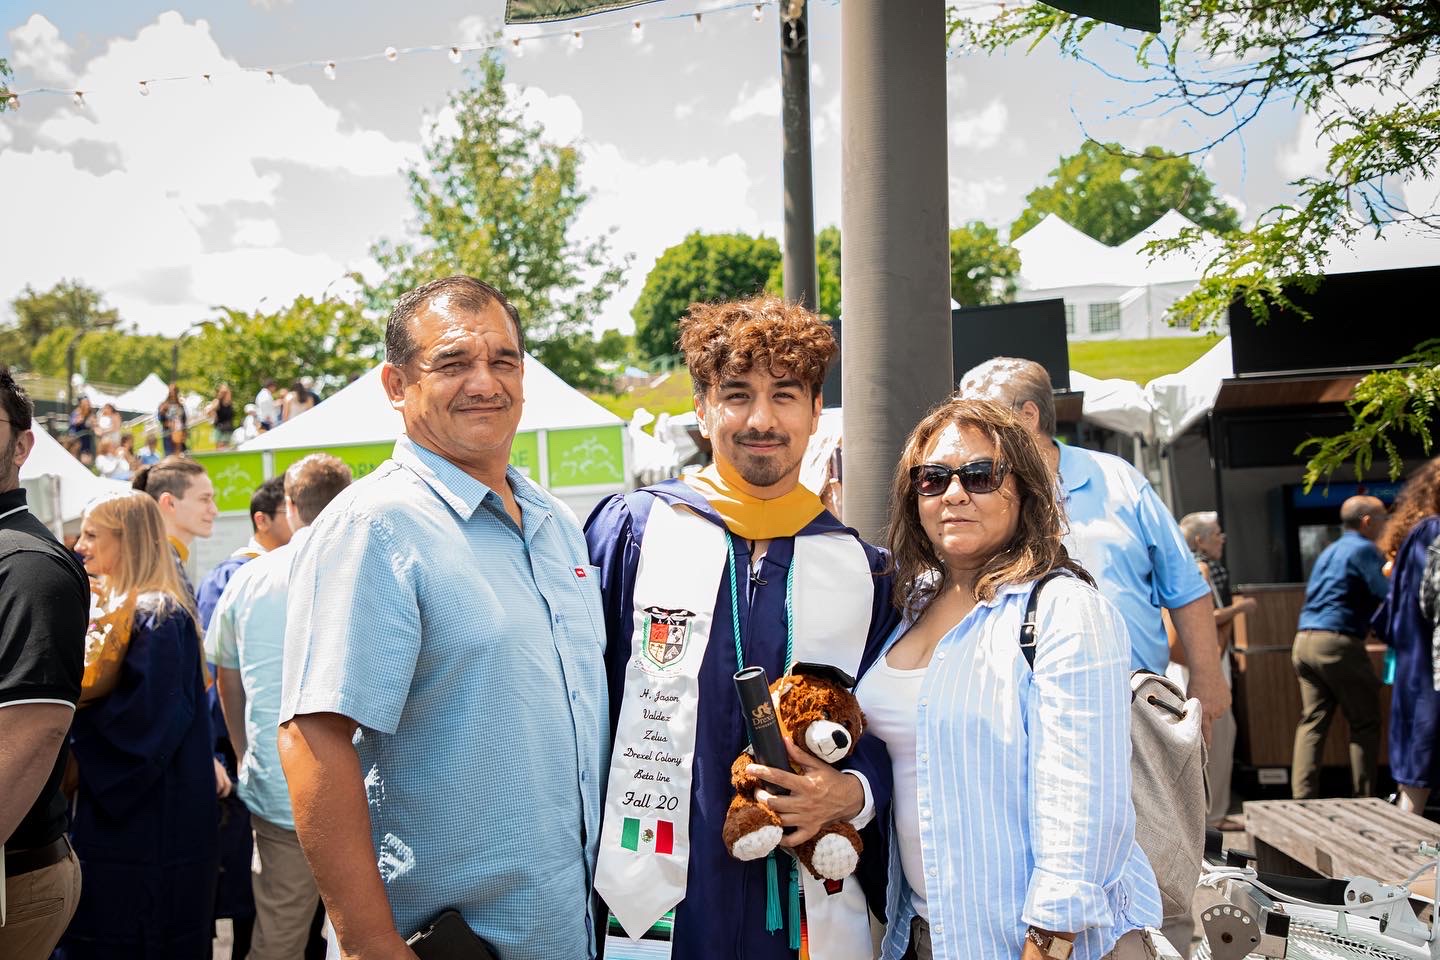 Master of Art Therapy and Counseling student Jason Valdez '20 standing with his parents at graduation.